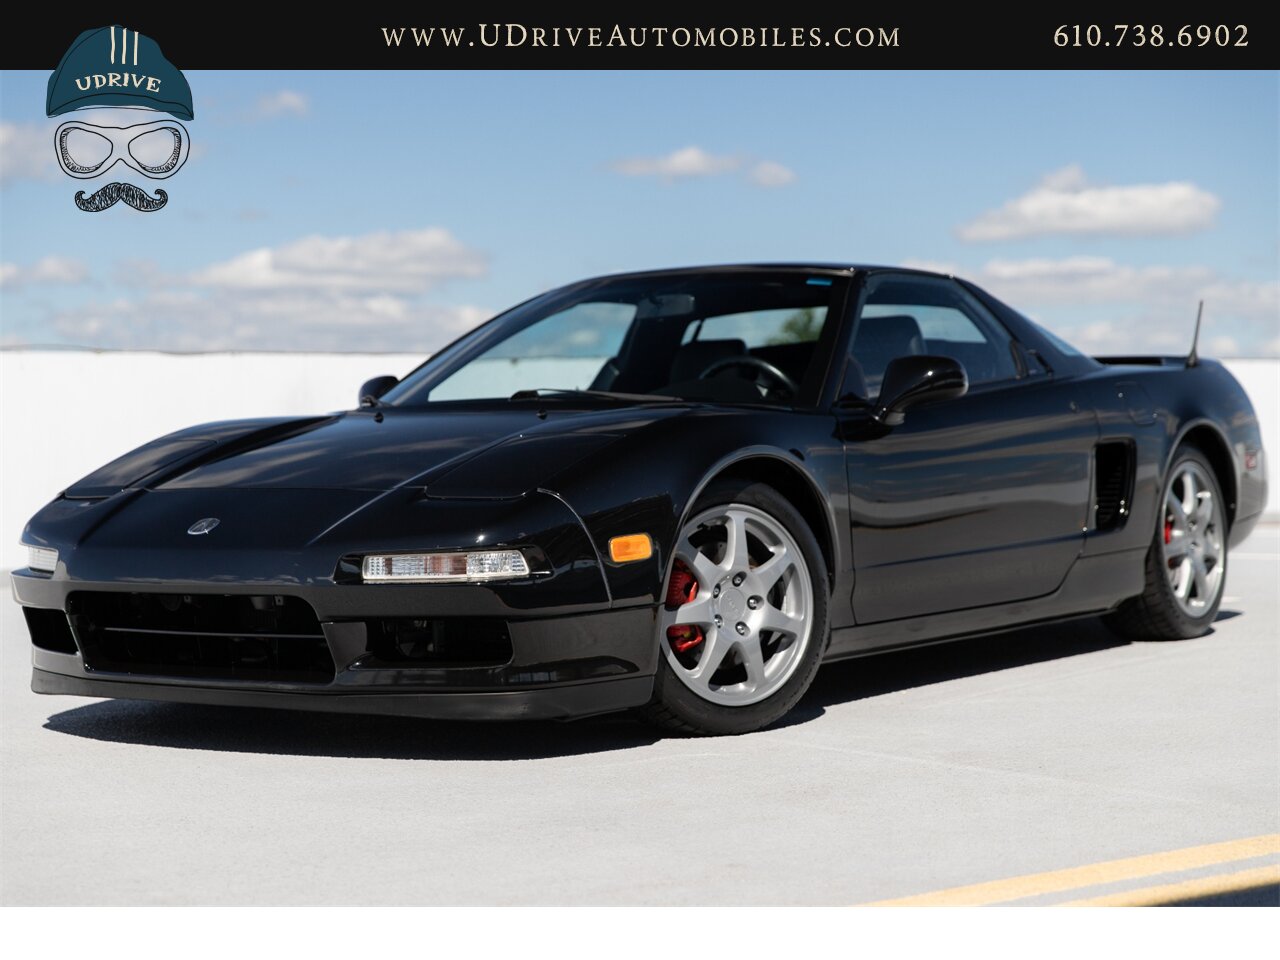 1996 Acura NSX NSX-T  5 Speed Manual Fresh Timing Belt Service - Photo 1 - West Chester, PA 19382